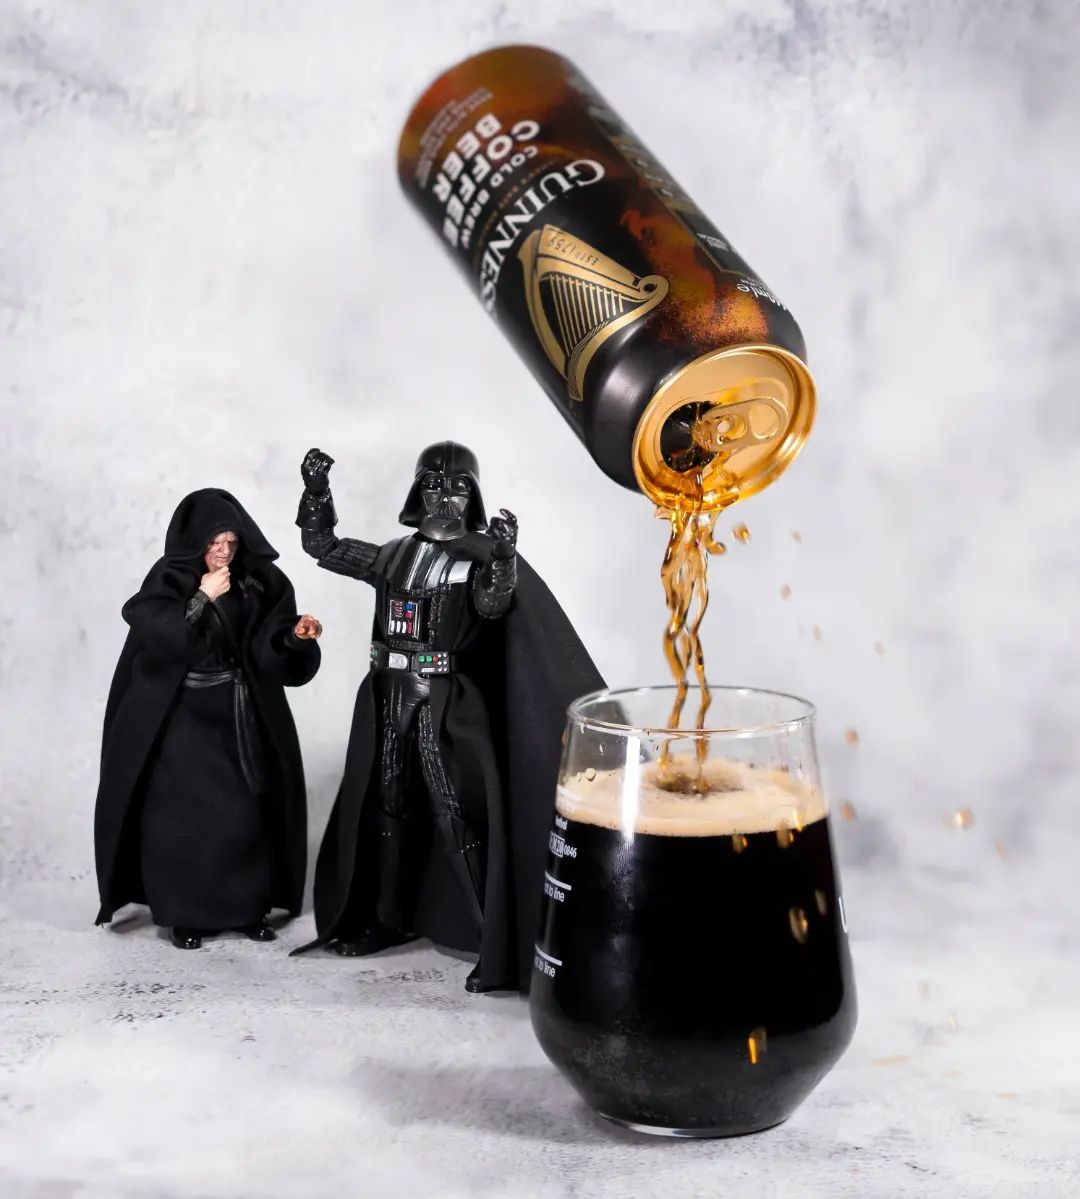 Action Shots Of Pop Culture Characters With Drinks By Andrea (14)